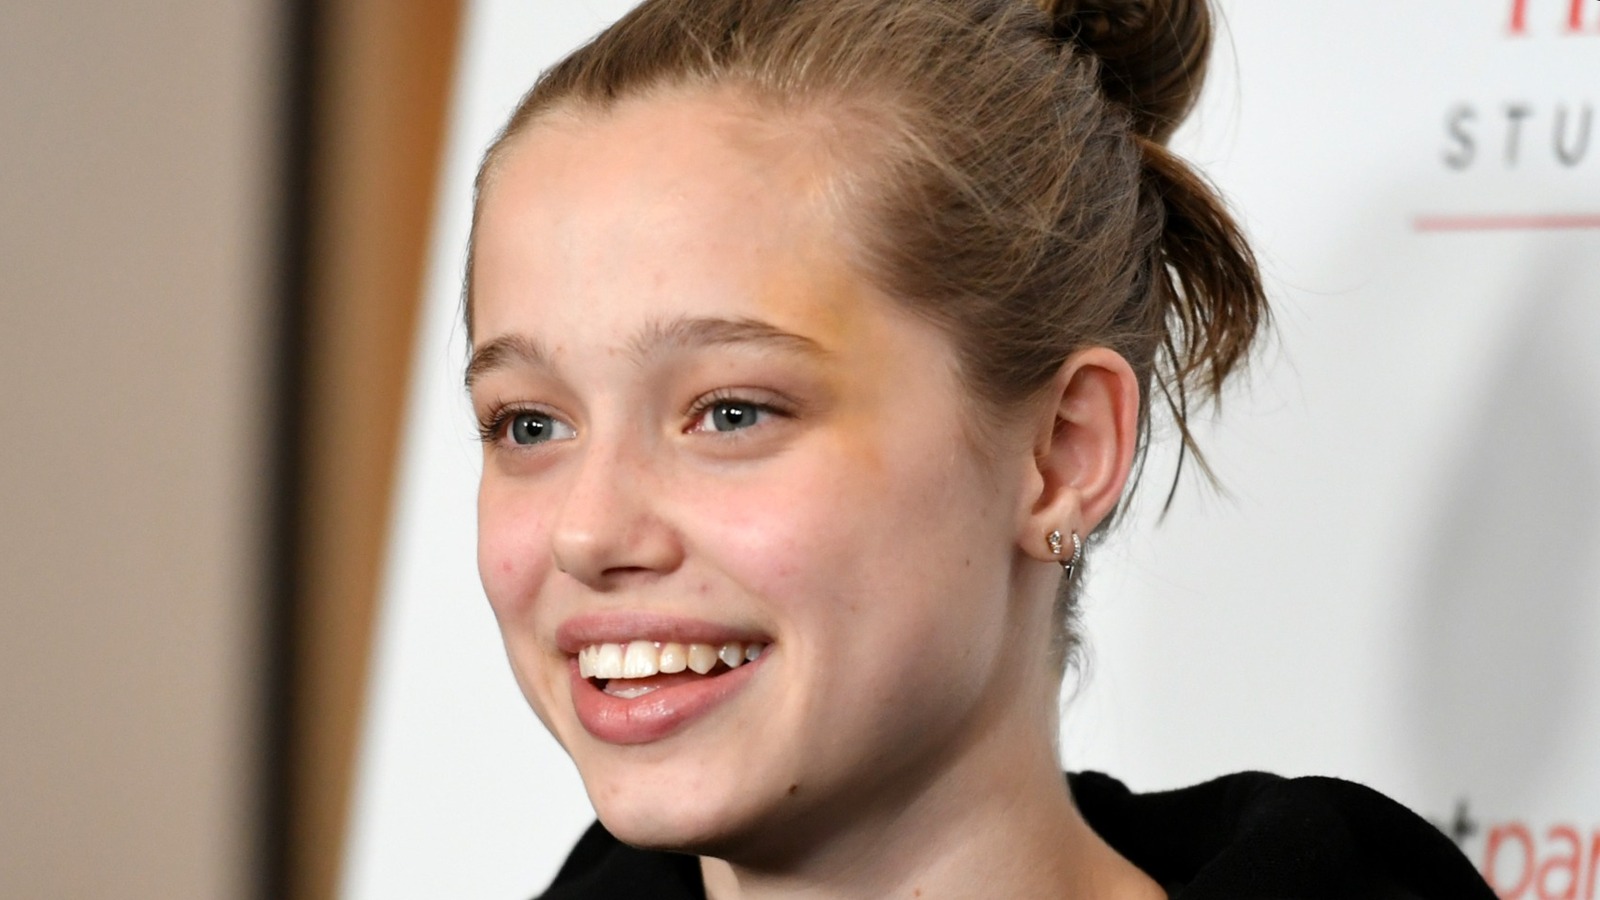 Does Shiloh Jolie-Pitt Have College Plans? Here's What We Know So Far